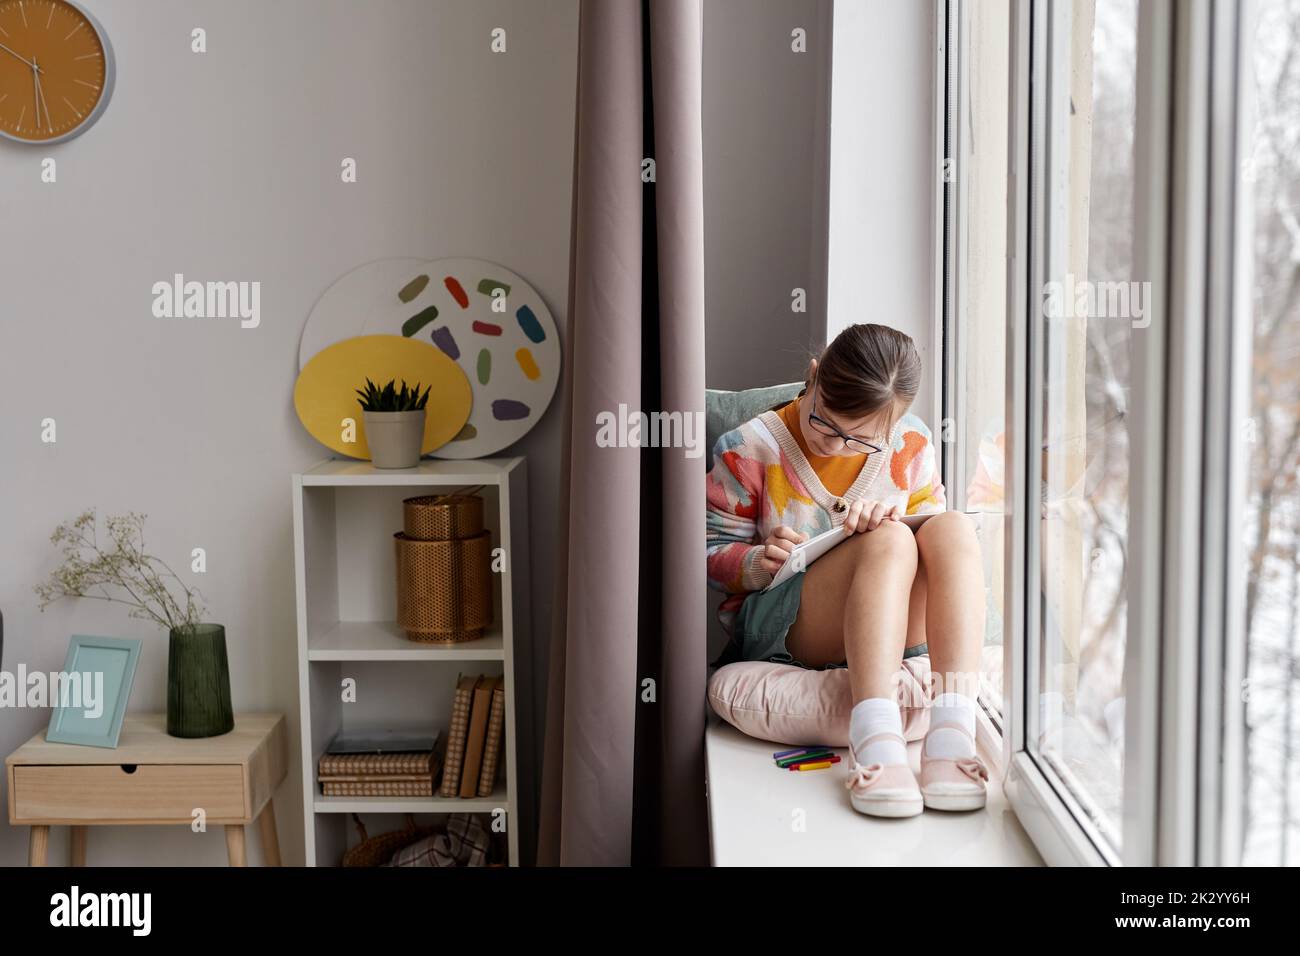 Full length portrait of teenage girl drawing pictures while sitting by window in cozy room, copy space Stock Photo